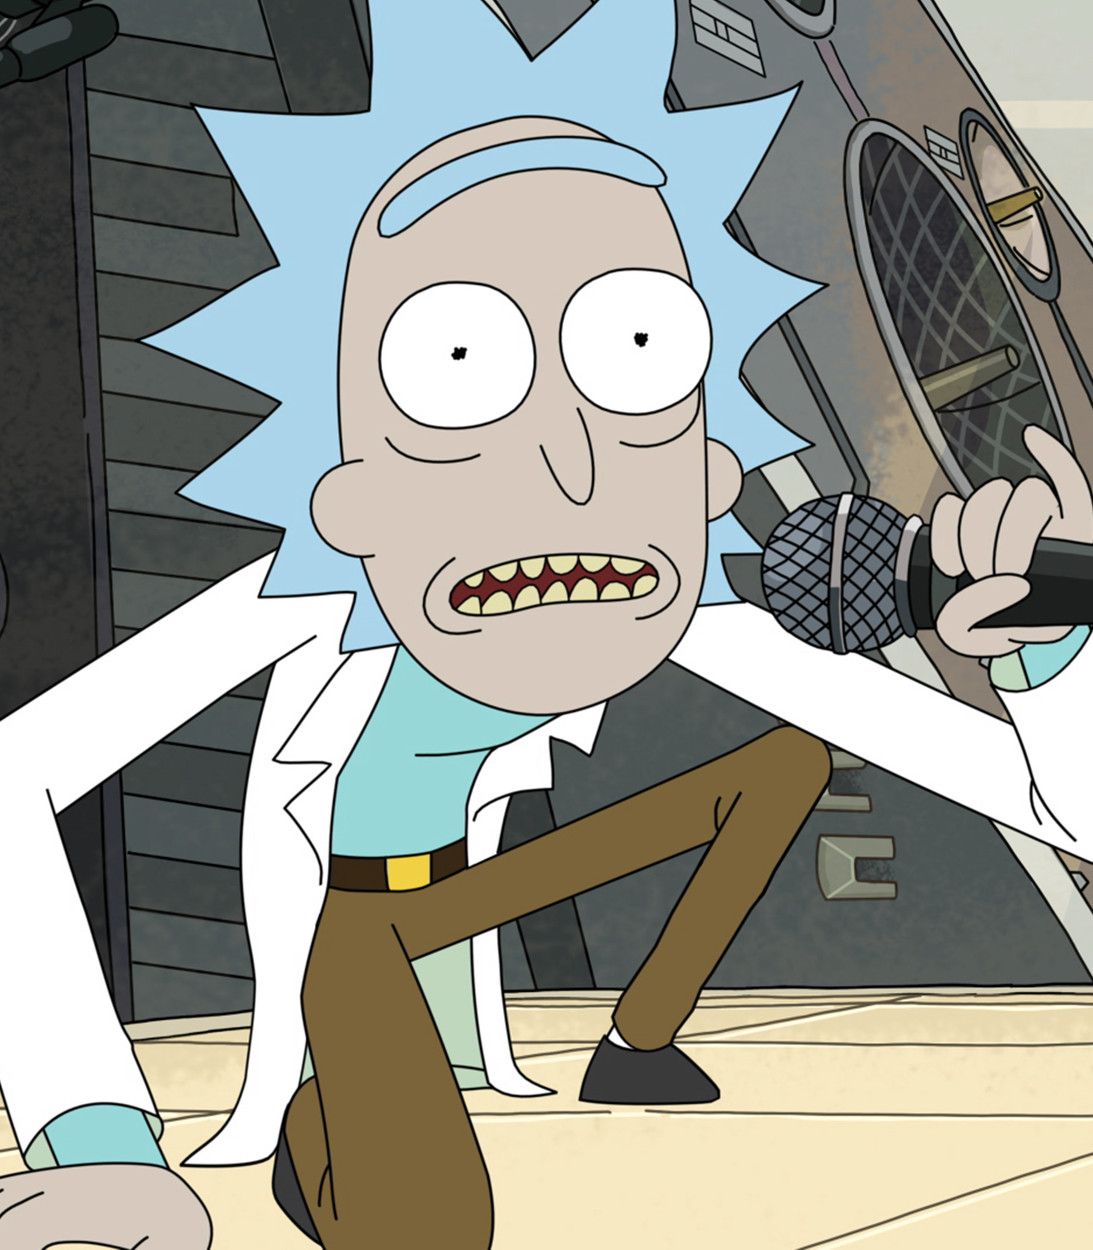 Rick performs Get Schwifty on Rick and Morty